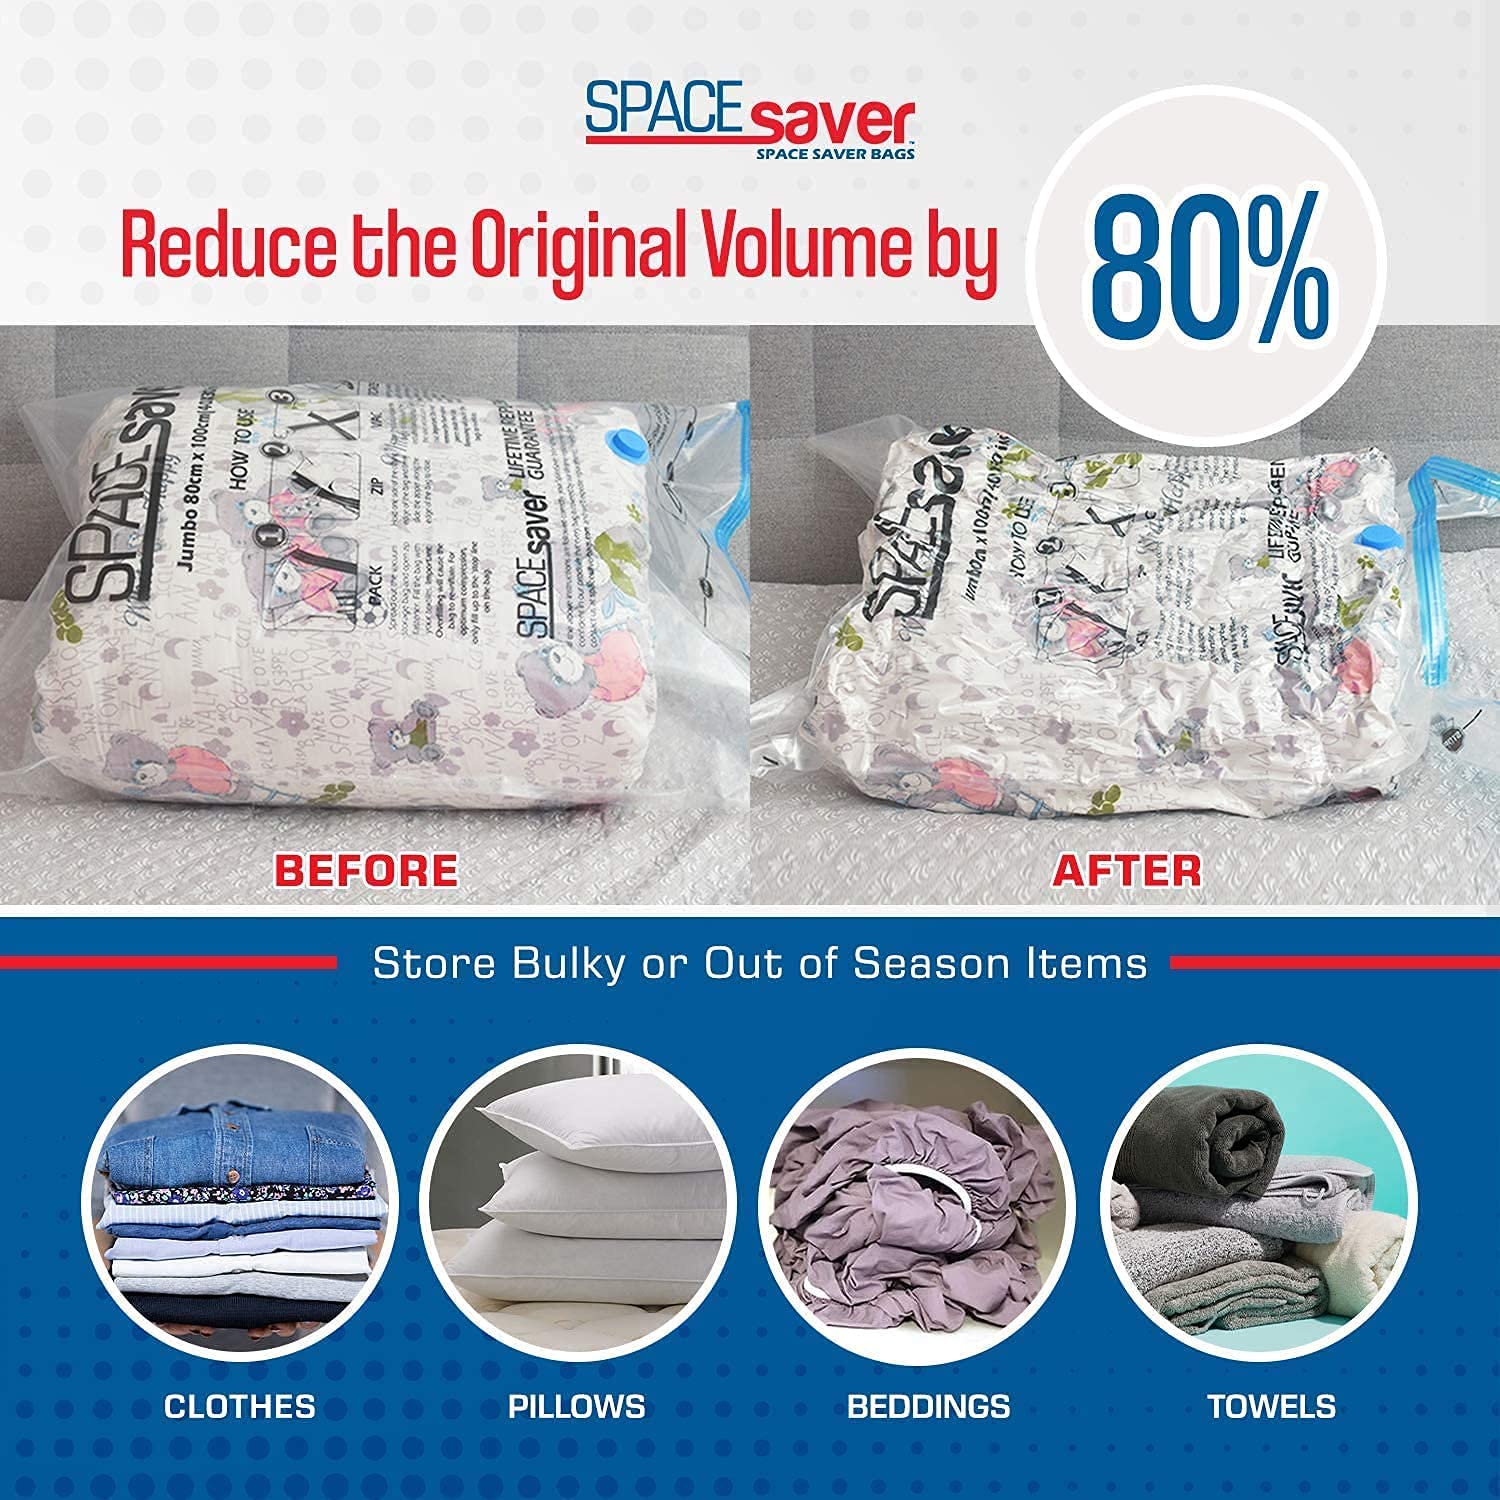 Spacesaver Premium *Jumbo* Vacuum Storage Bags (Works with Any Vacuum Cleaner + Free Hand-Pump for Travel!) Double-Zip Seal and Triple Seal Turbo-Valve for 80% More Compression! - image 4 of 6